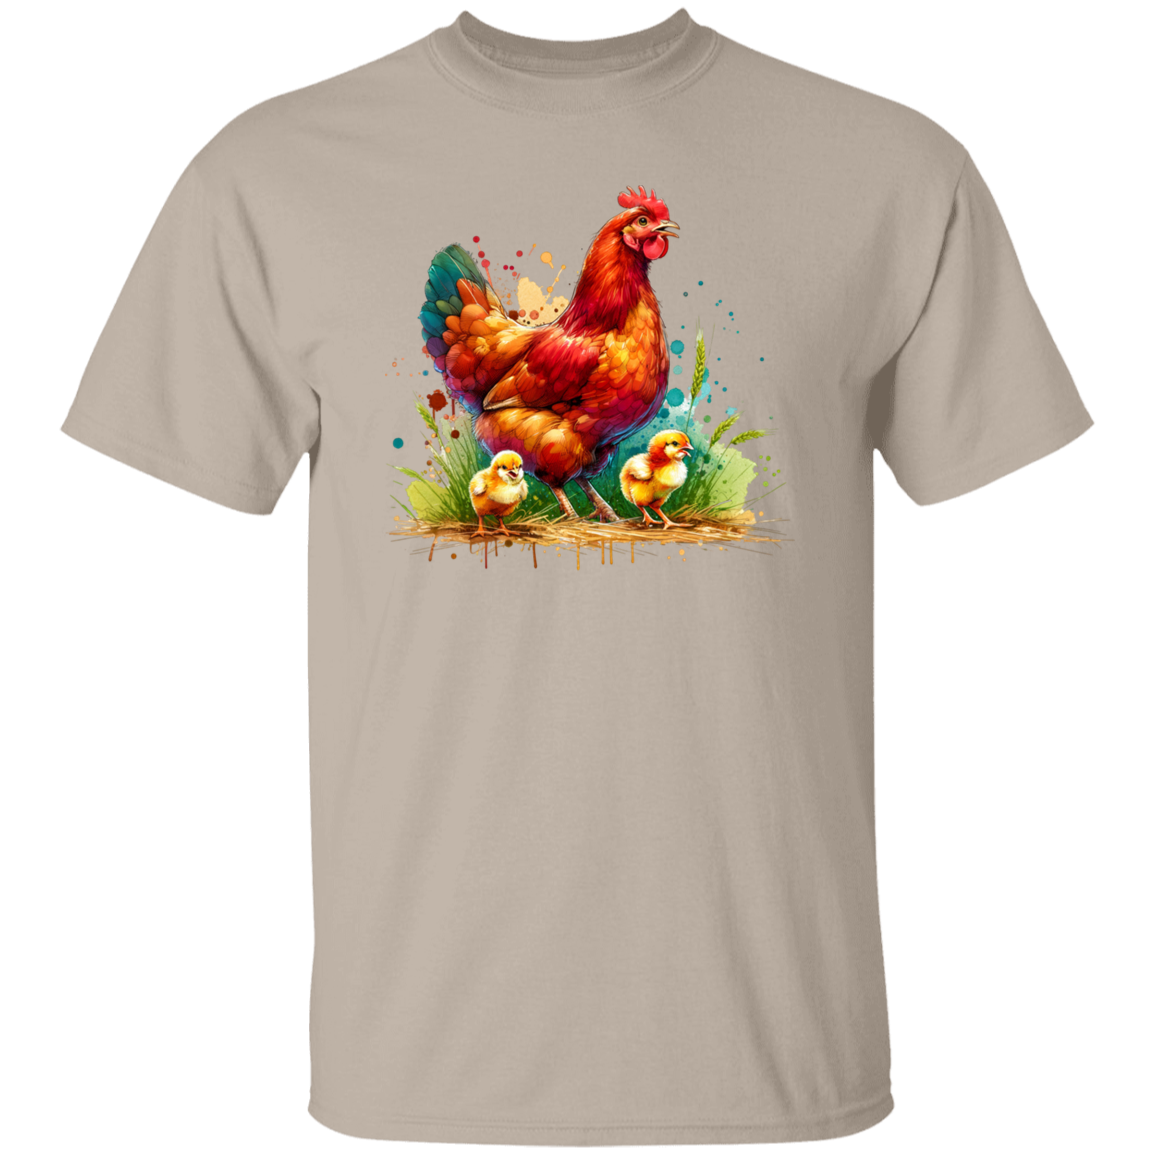 Rhode Island Red Hen with Chicks - T-shirts, Hoodies and Sweatshirts